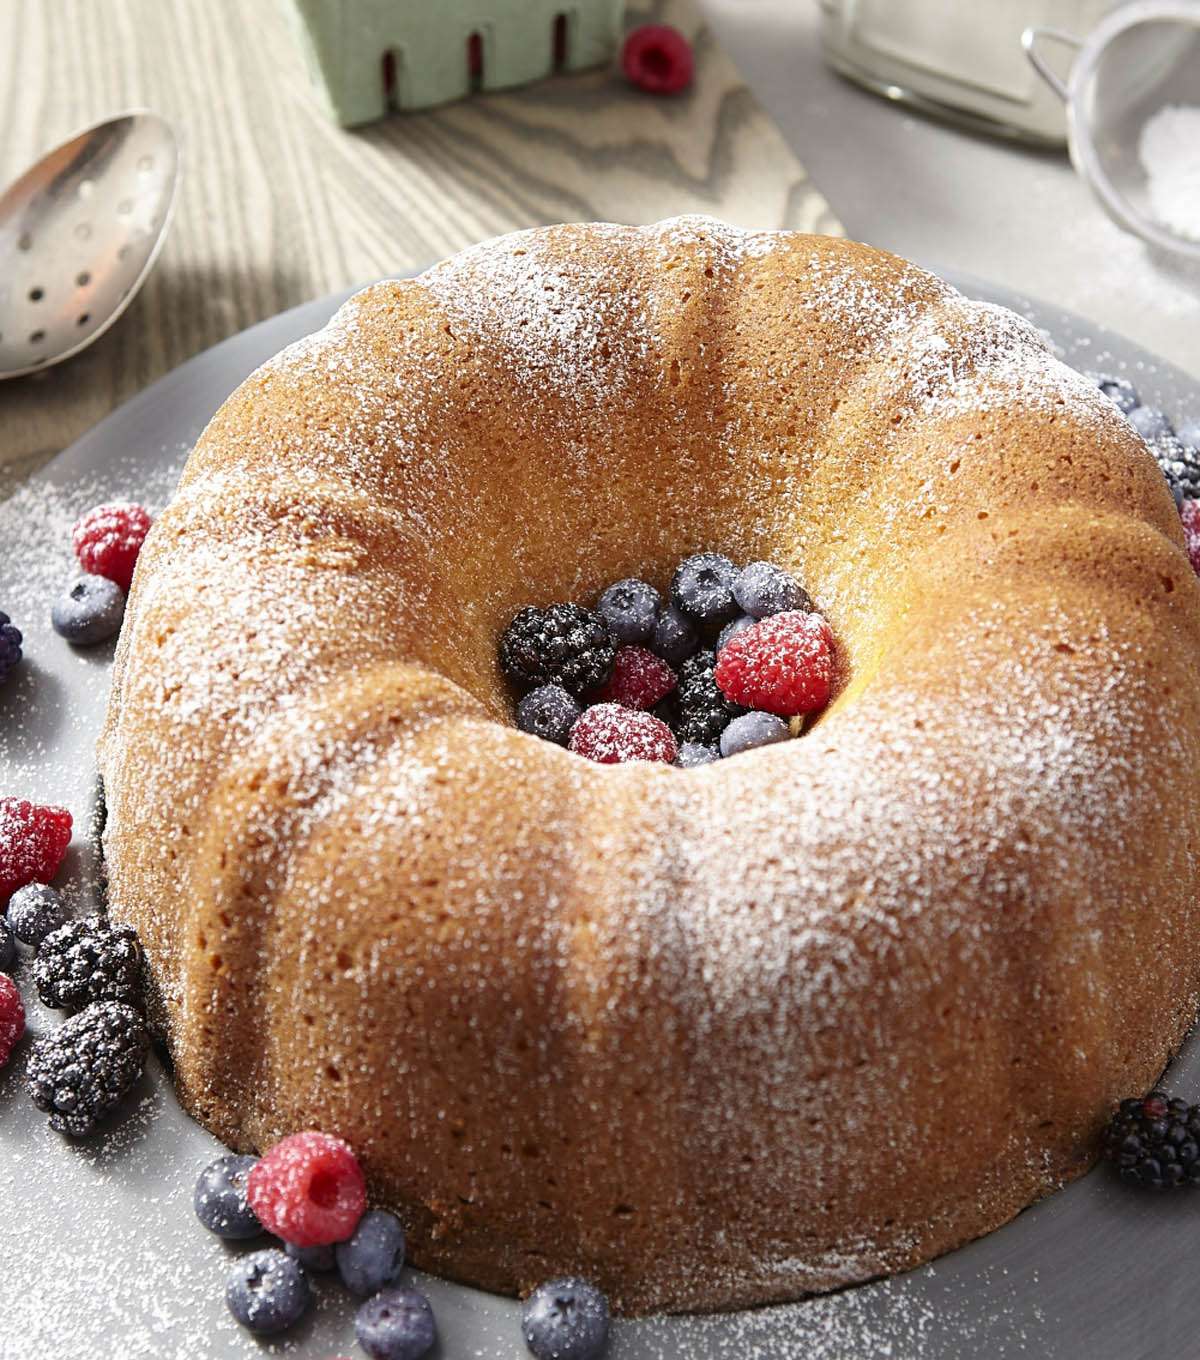 Learn To Bake Classic Pound Cake